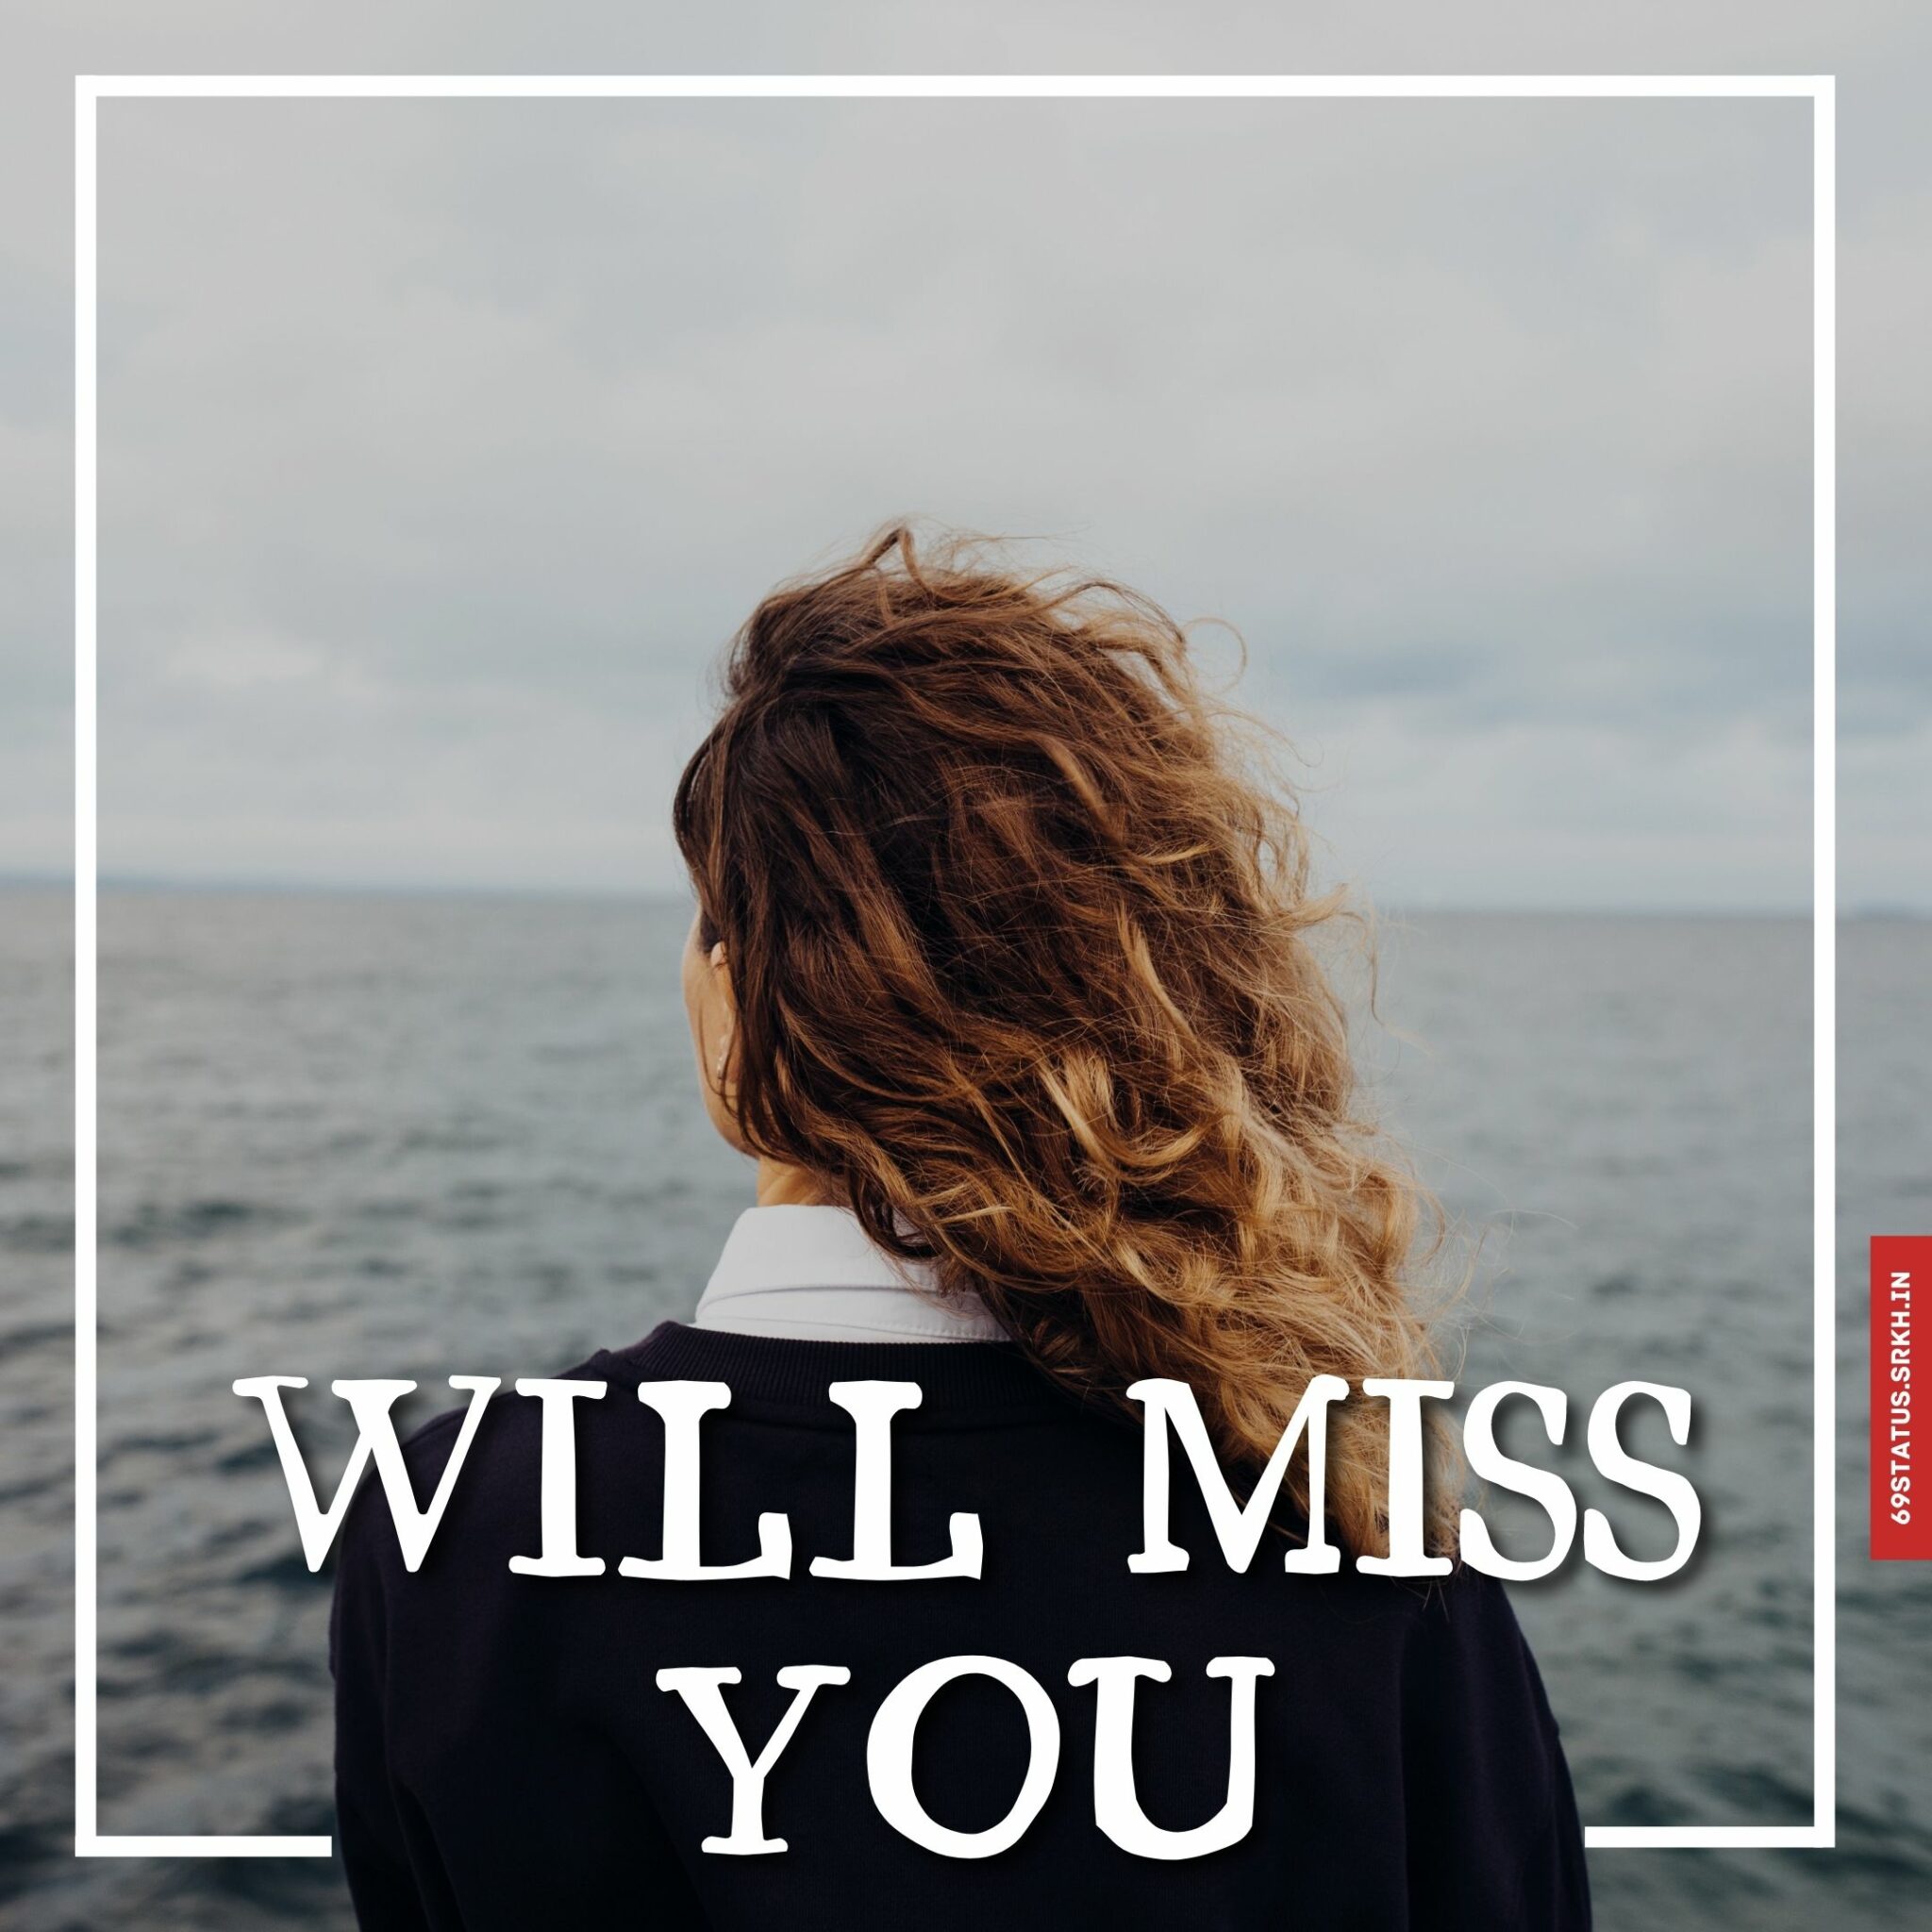 Will miss you images